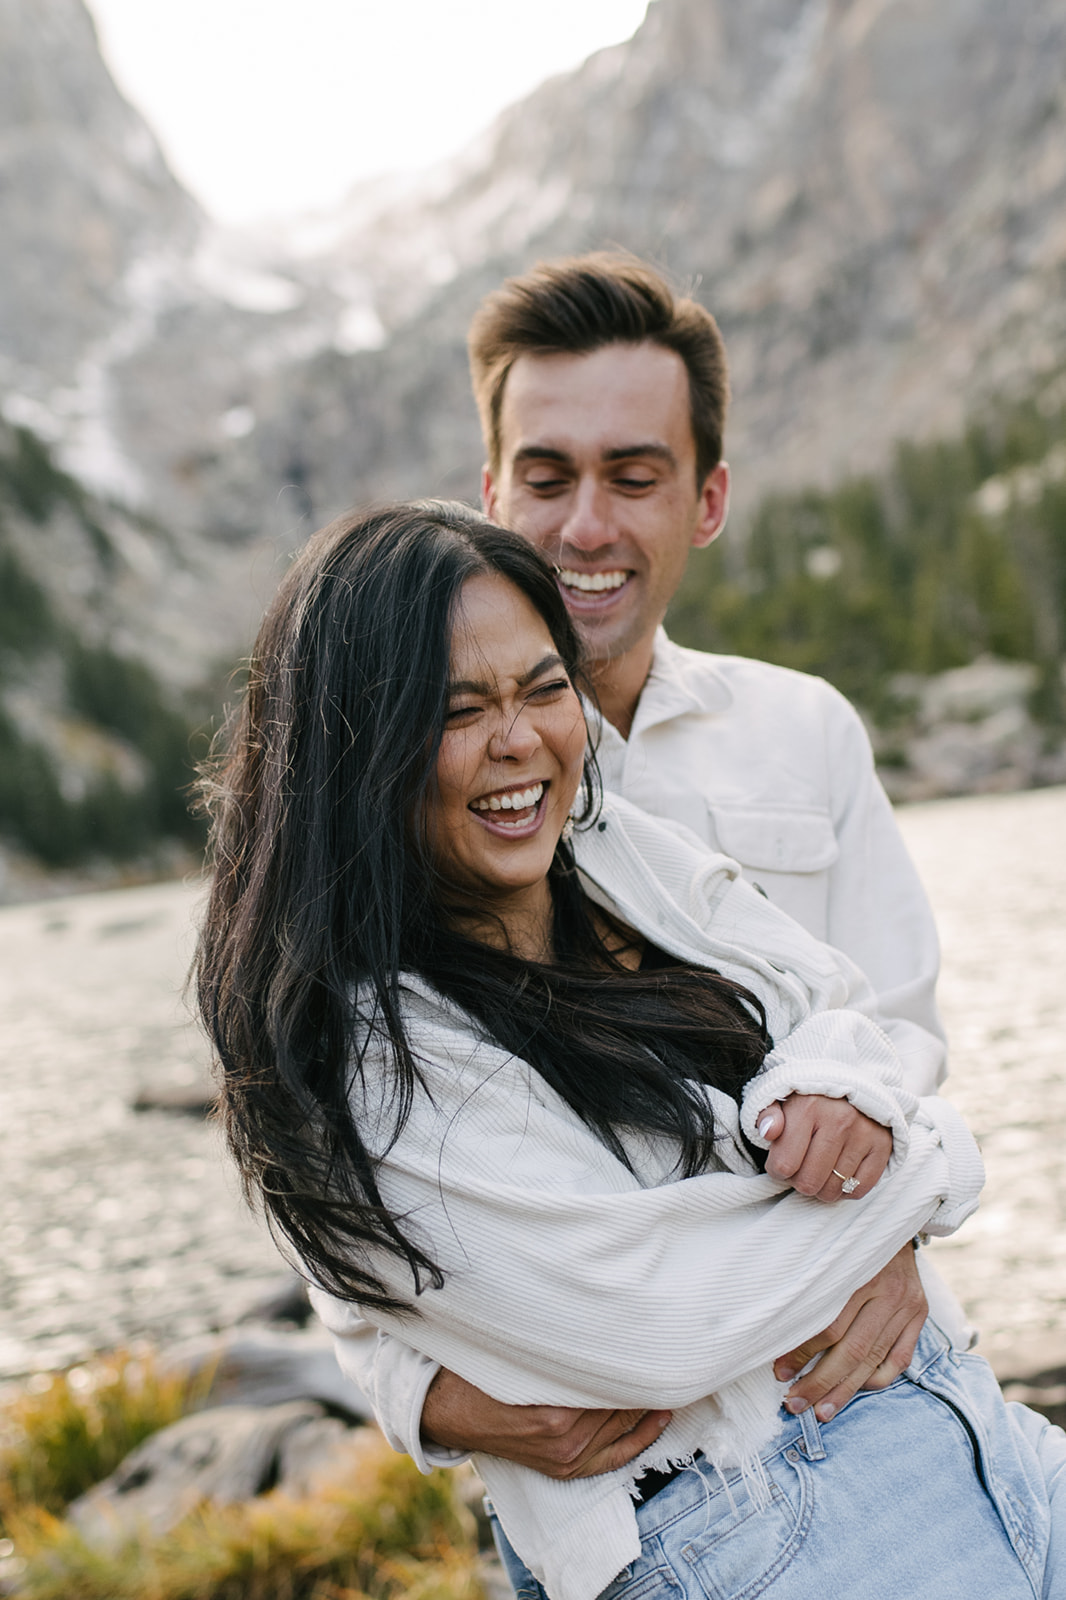 A documentary-style and candid engagement session at Dream Lake in Rocky Mountain National Park.